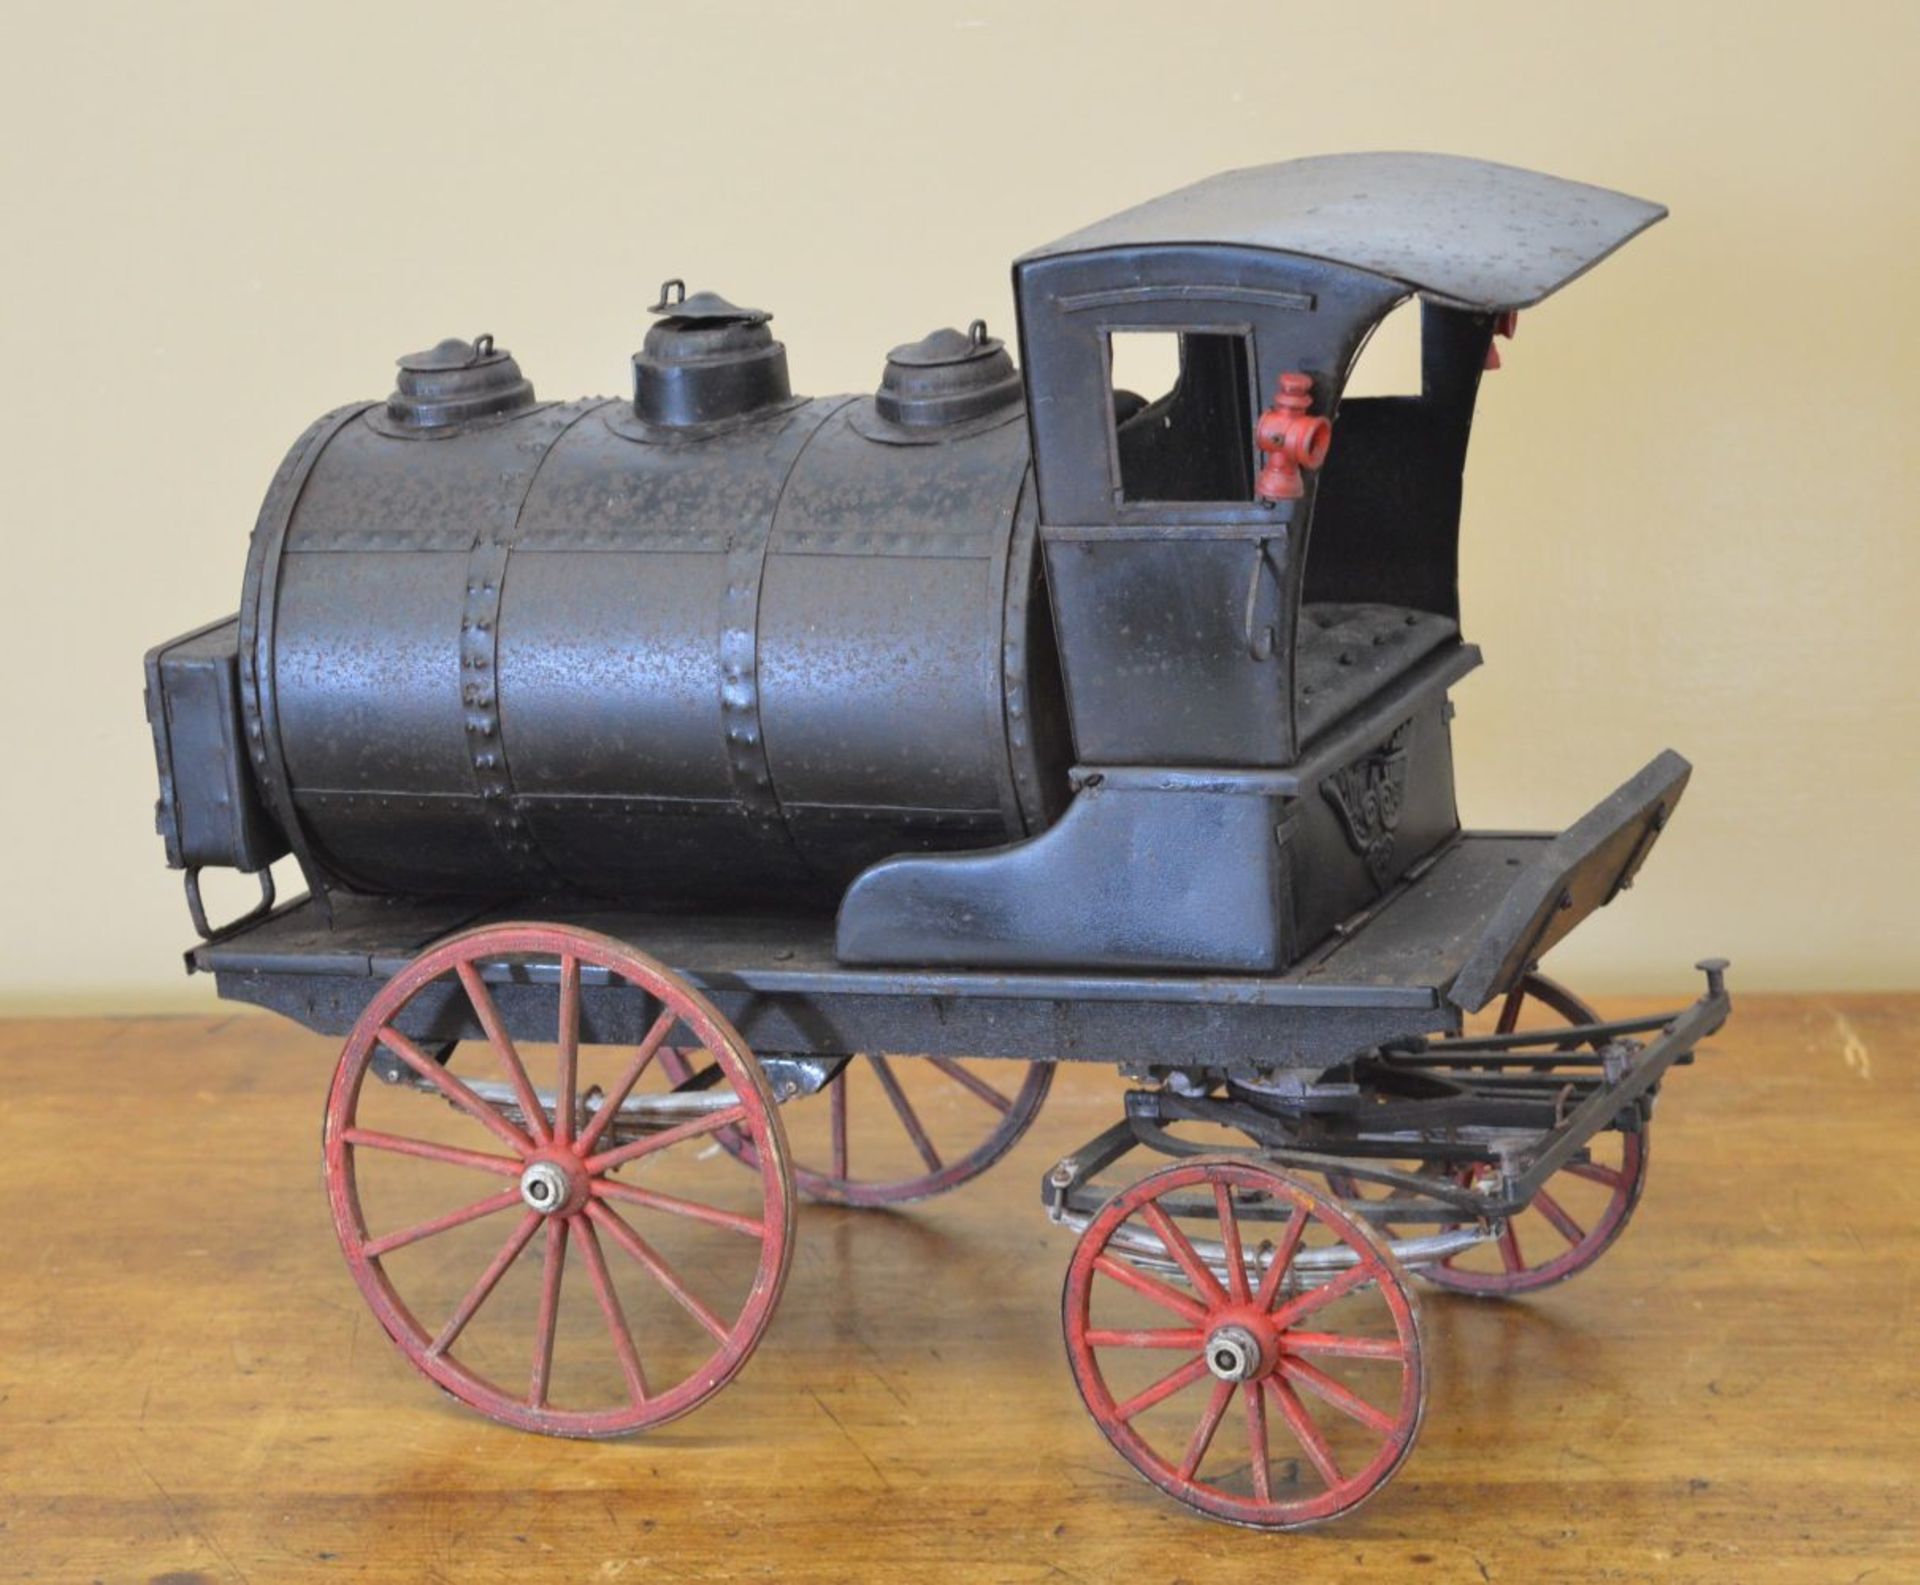 METAL MODEL OF A STEAM ENGINE - Image 2 of 3